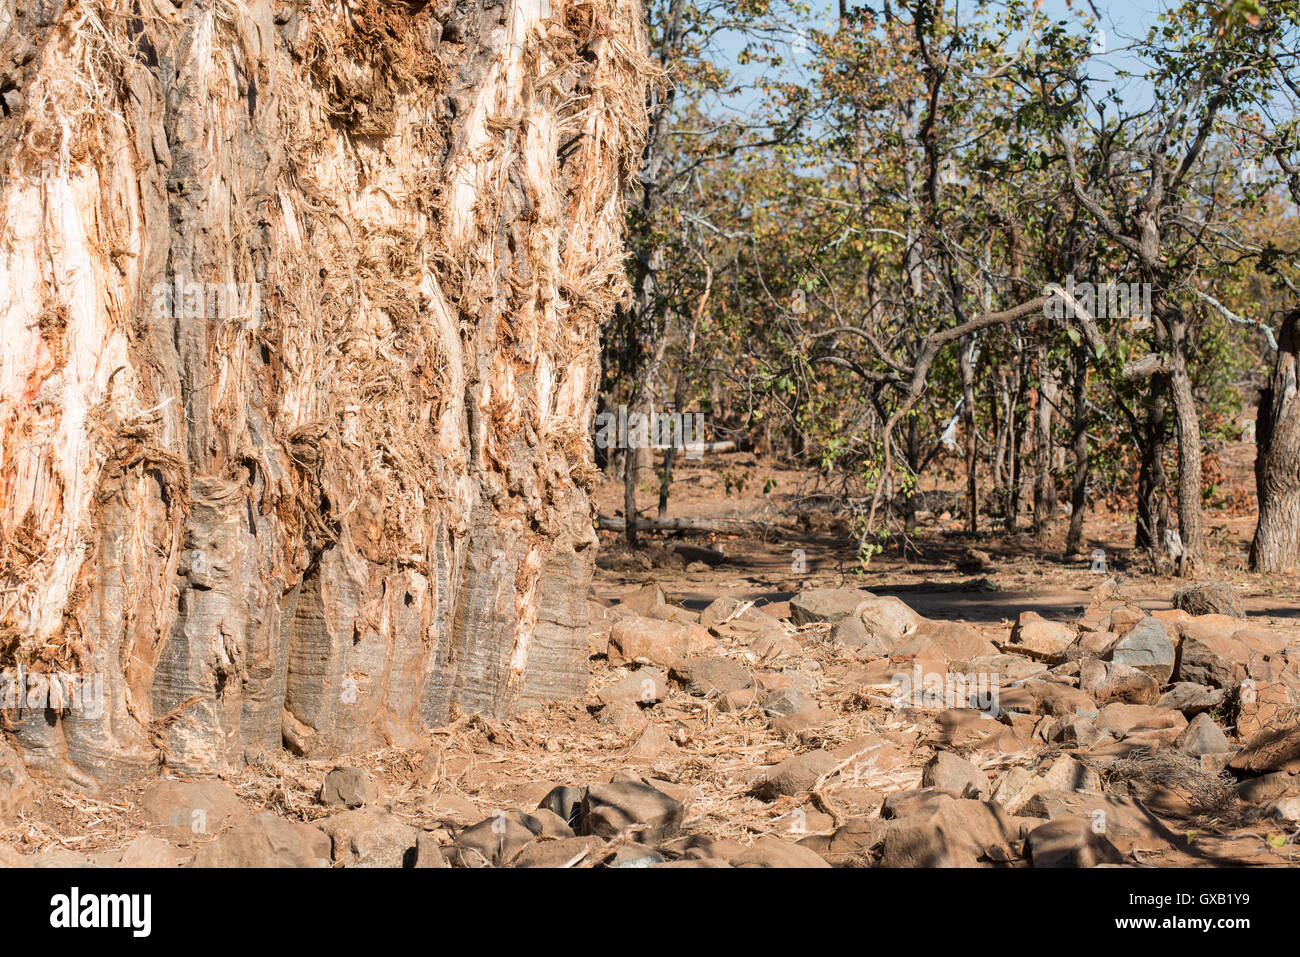 Rocks and wire at the base of a baobab tree in an effort to protect it from elephants Stock Photo